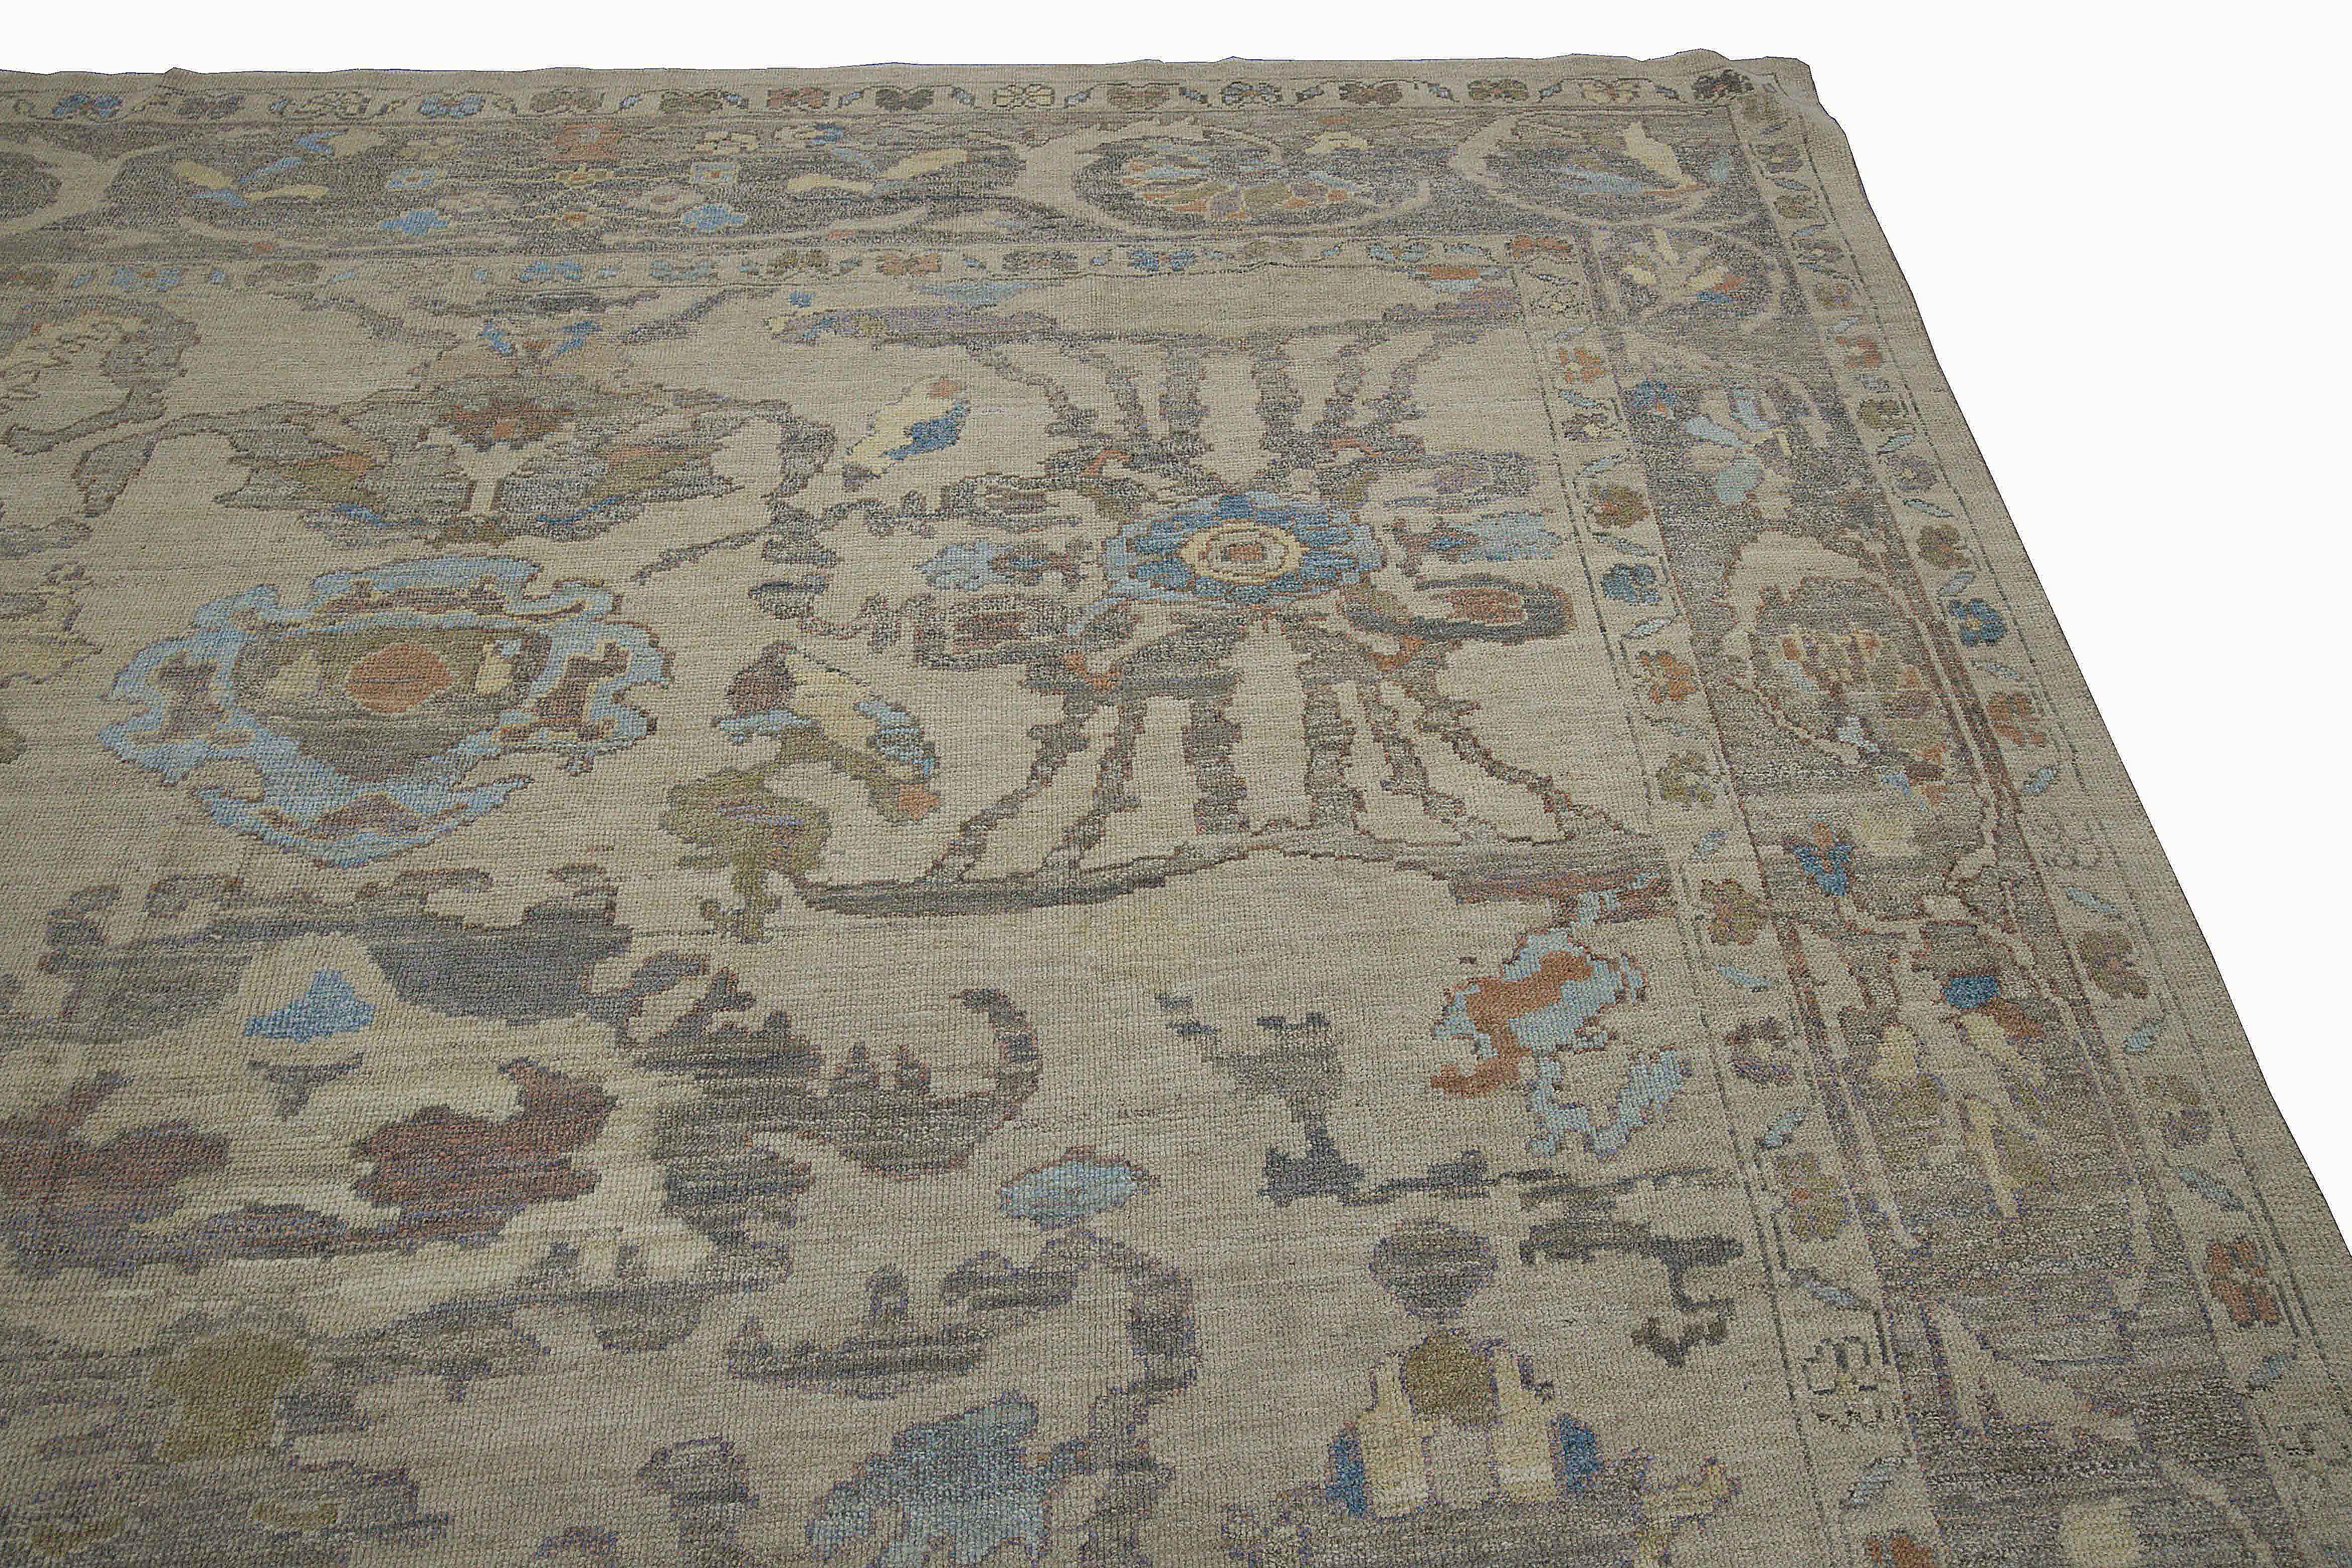 Modern Turkish rug made of handwoven sheep’s wool of the finest quality. It’s colored with organic vegetable dyes that are certified safe for humans and pets alike. It features a lovely beige field with floral details in blue, brown and gray usually